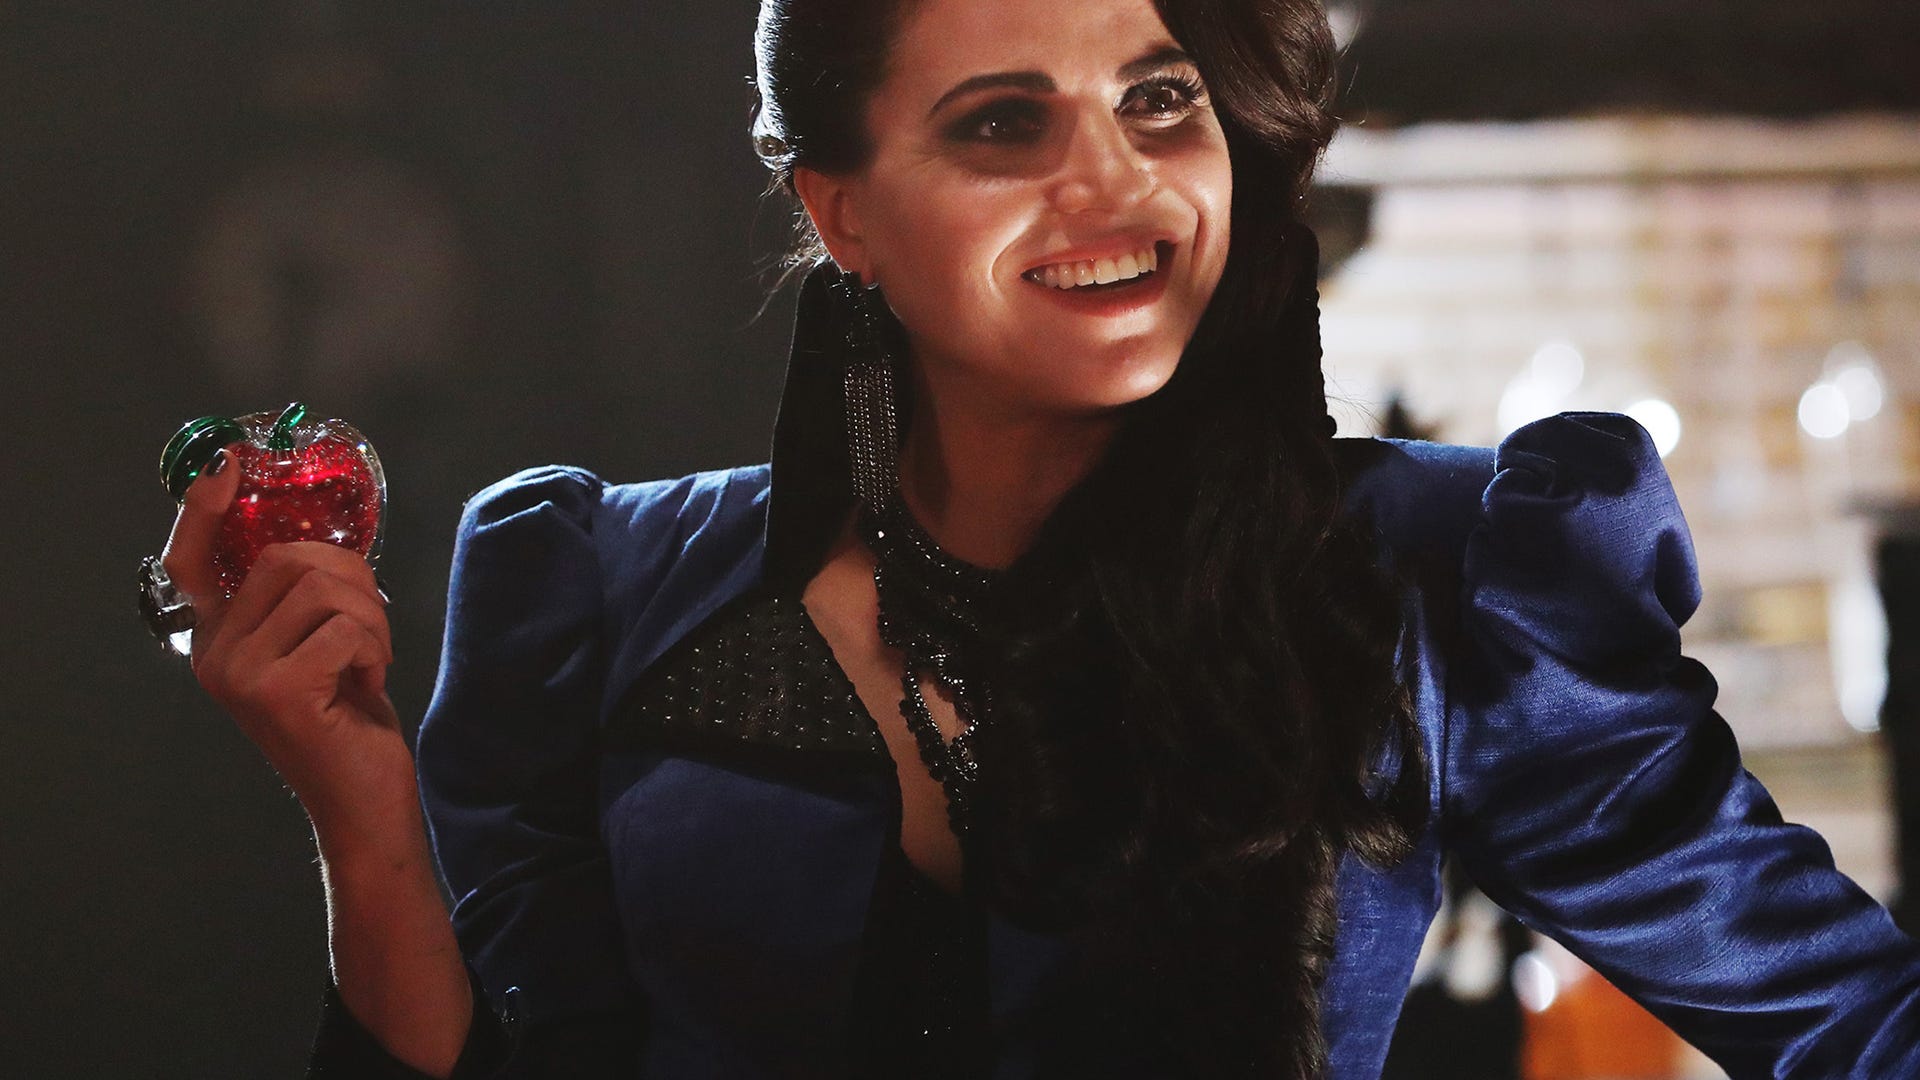 Lana Parrilla, Once Upon a Time